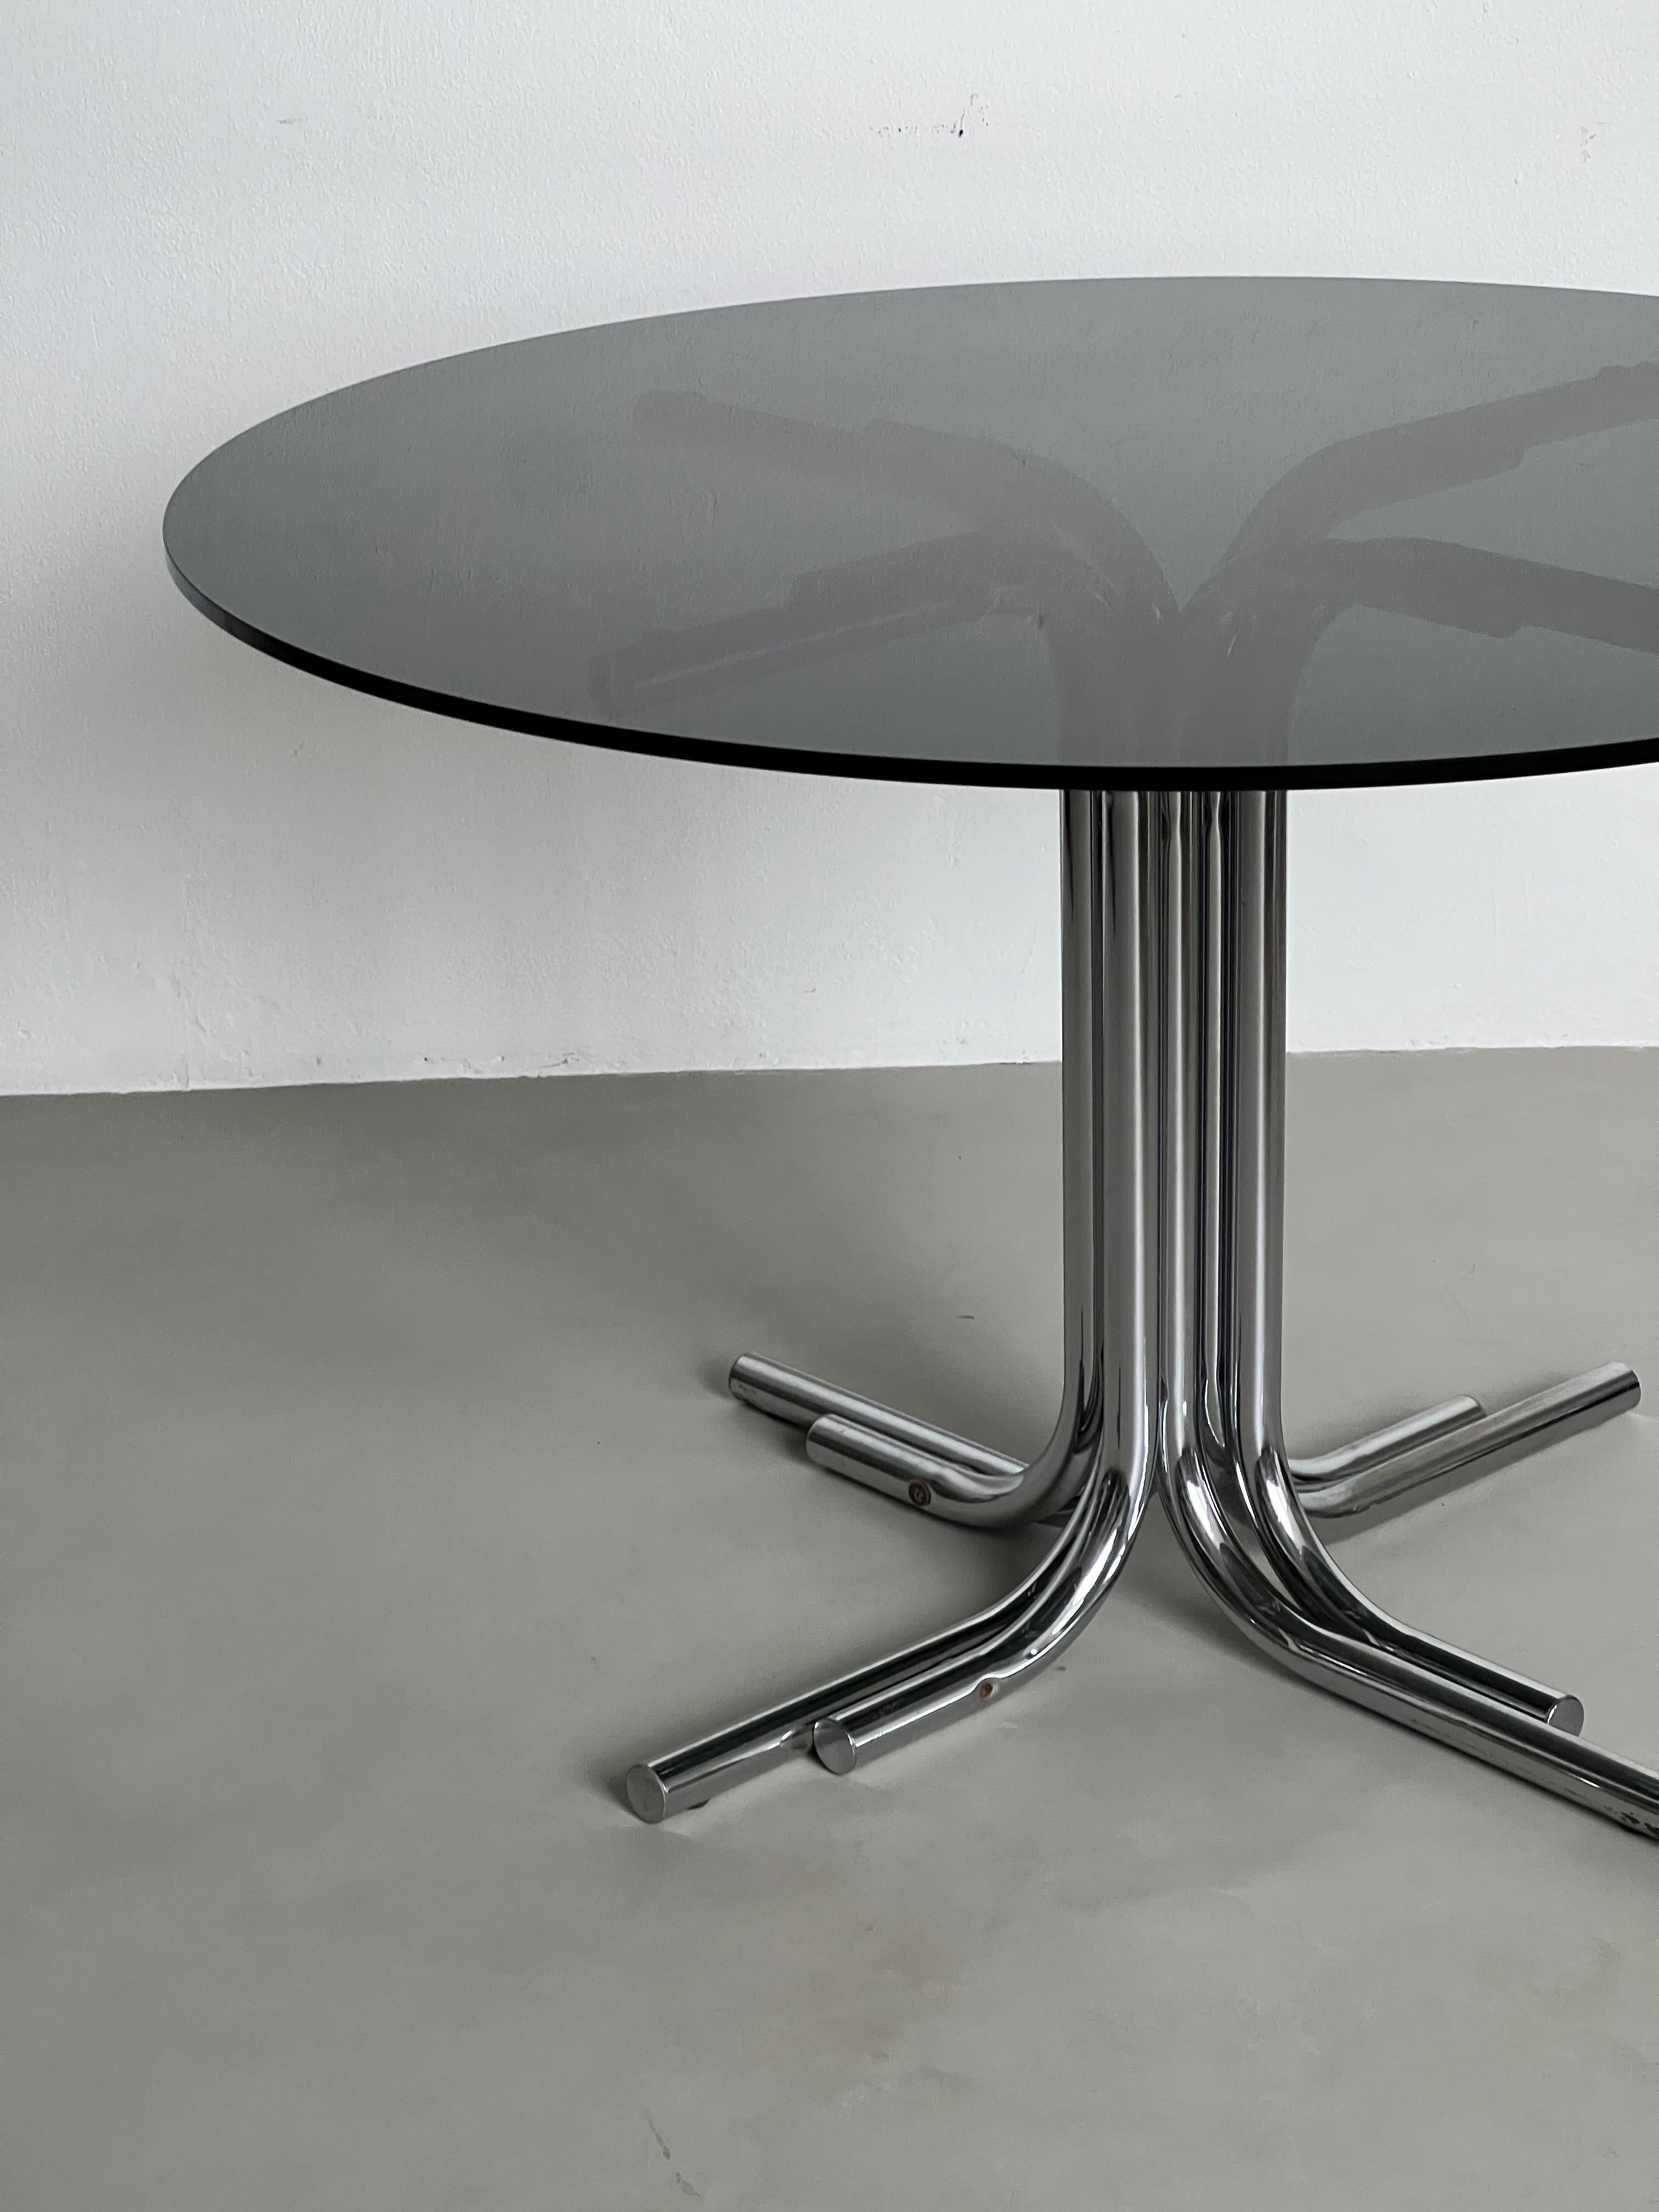 Offered for sale is a stunning and timeless Space Age dining table, with tubular legs in chromed metal and a round smoked glass top with squared edge. Designed and manufactured most likely during the Seventies, it's anonymous, but the choice of